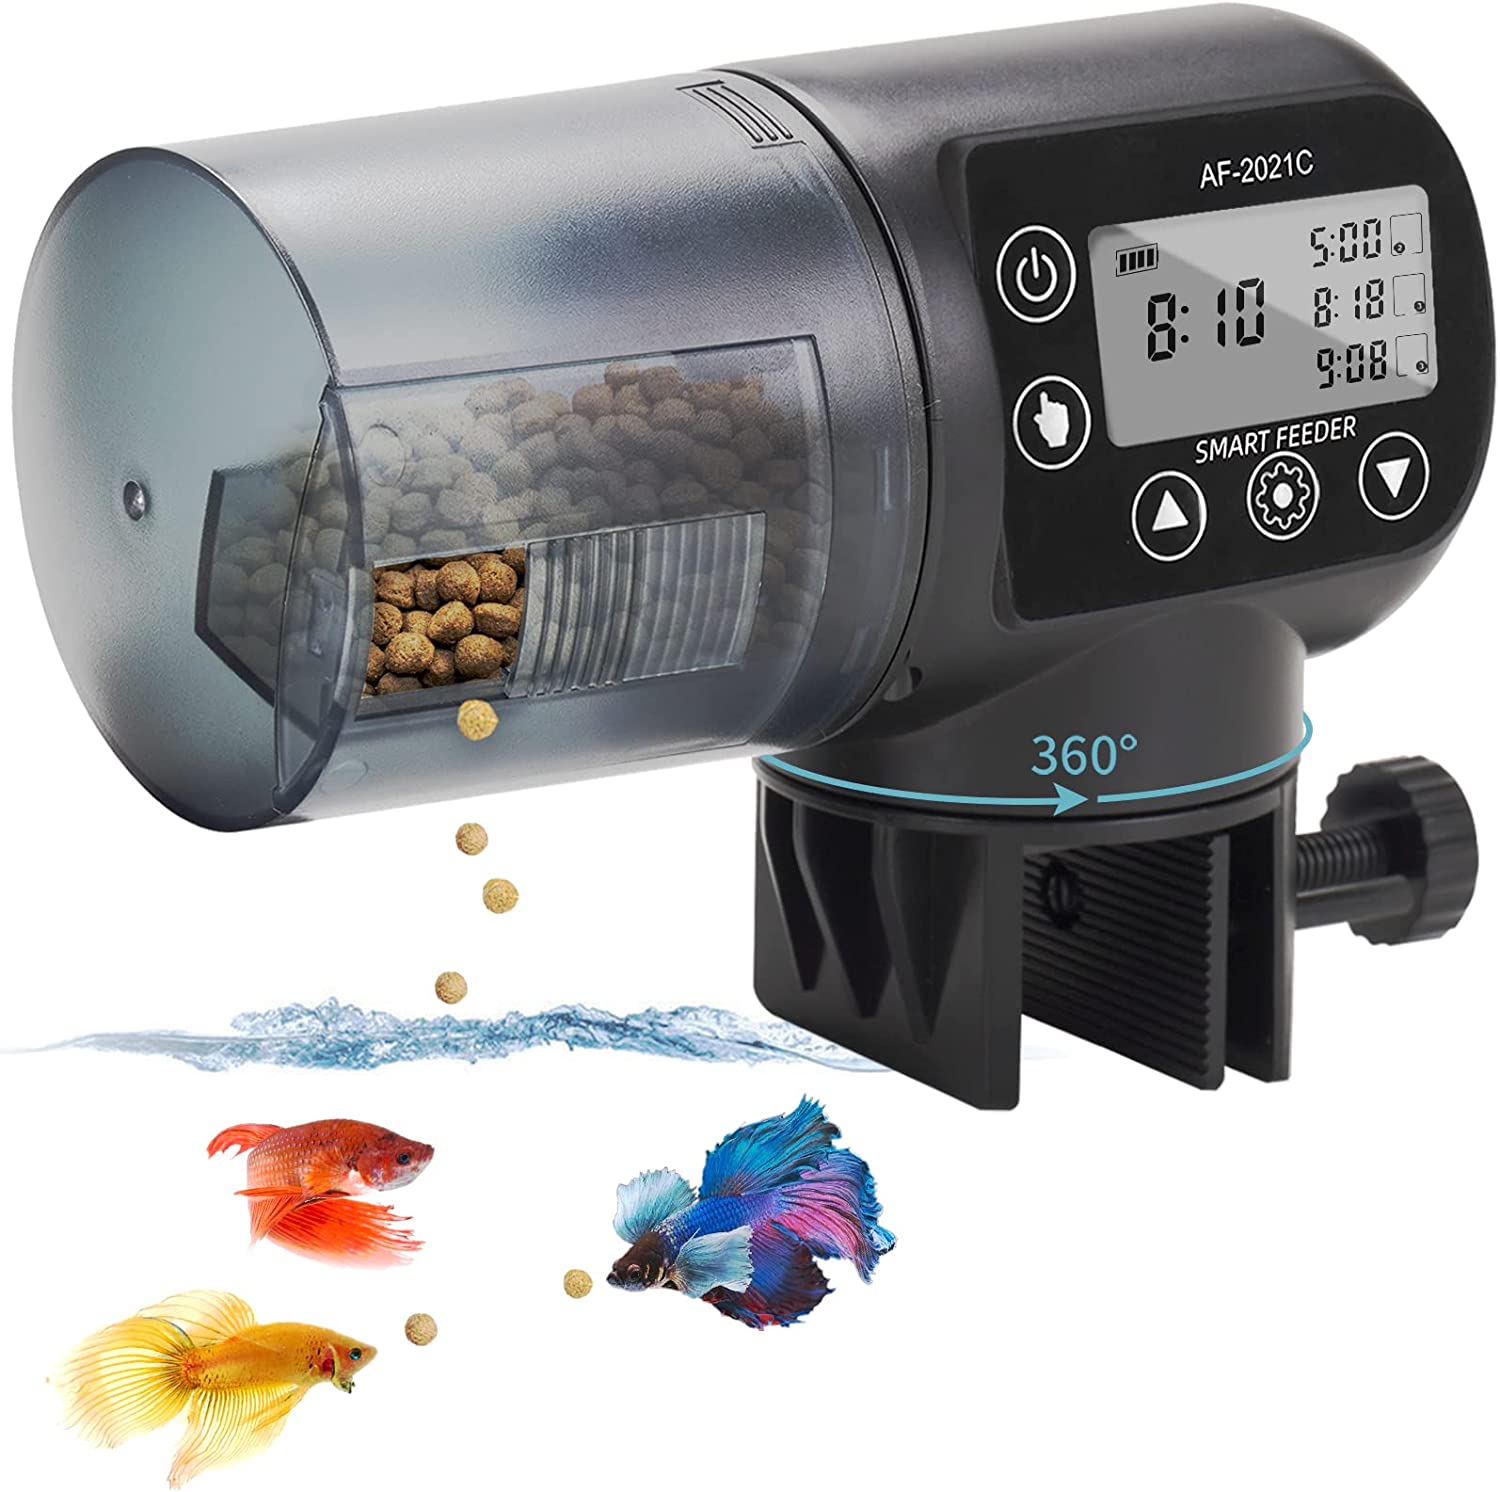 Easy Programmable Fish Feeder Automatic Dispenser for Fish Tank 